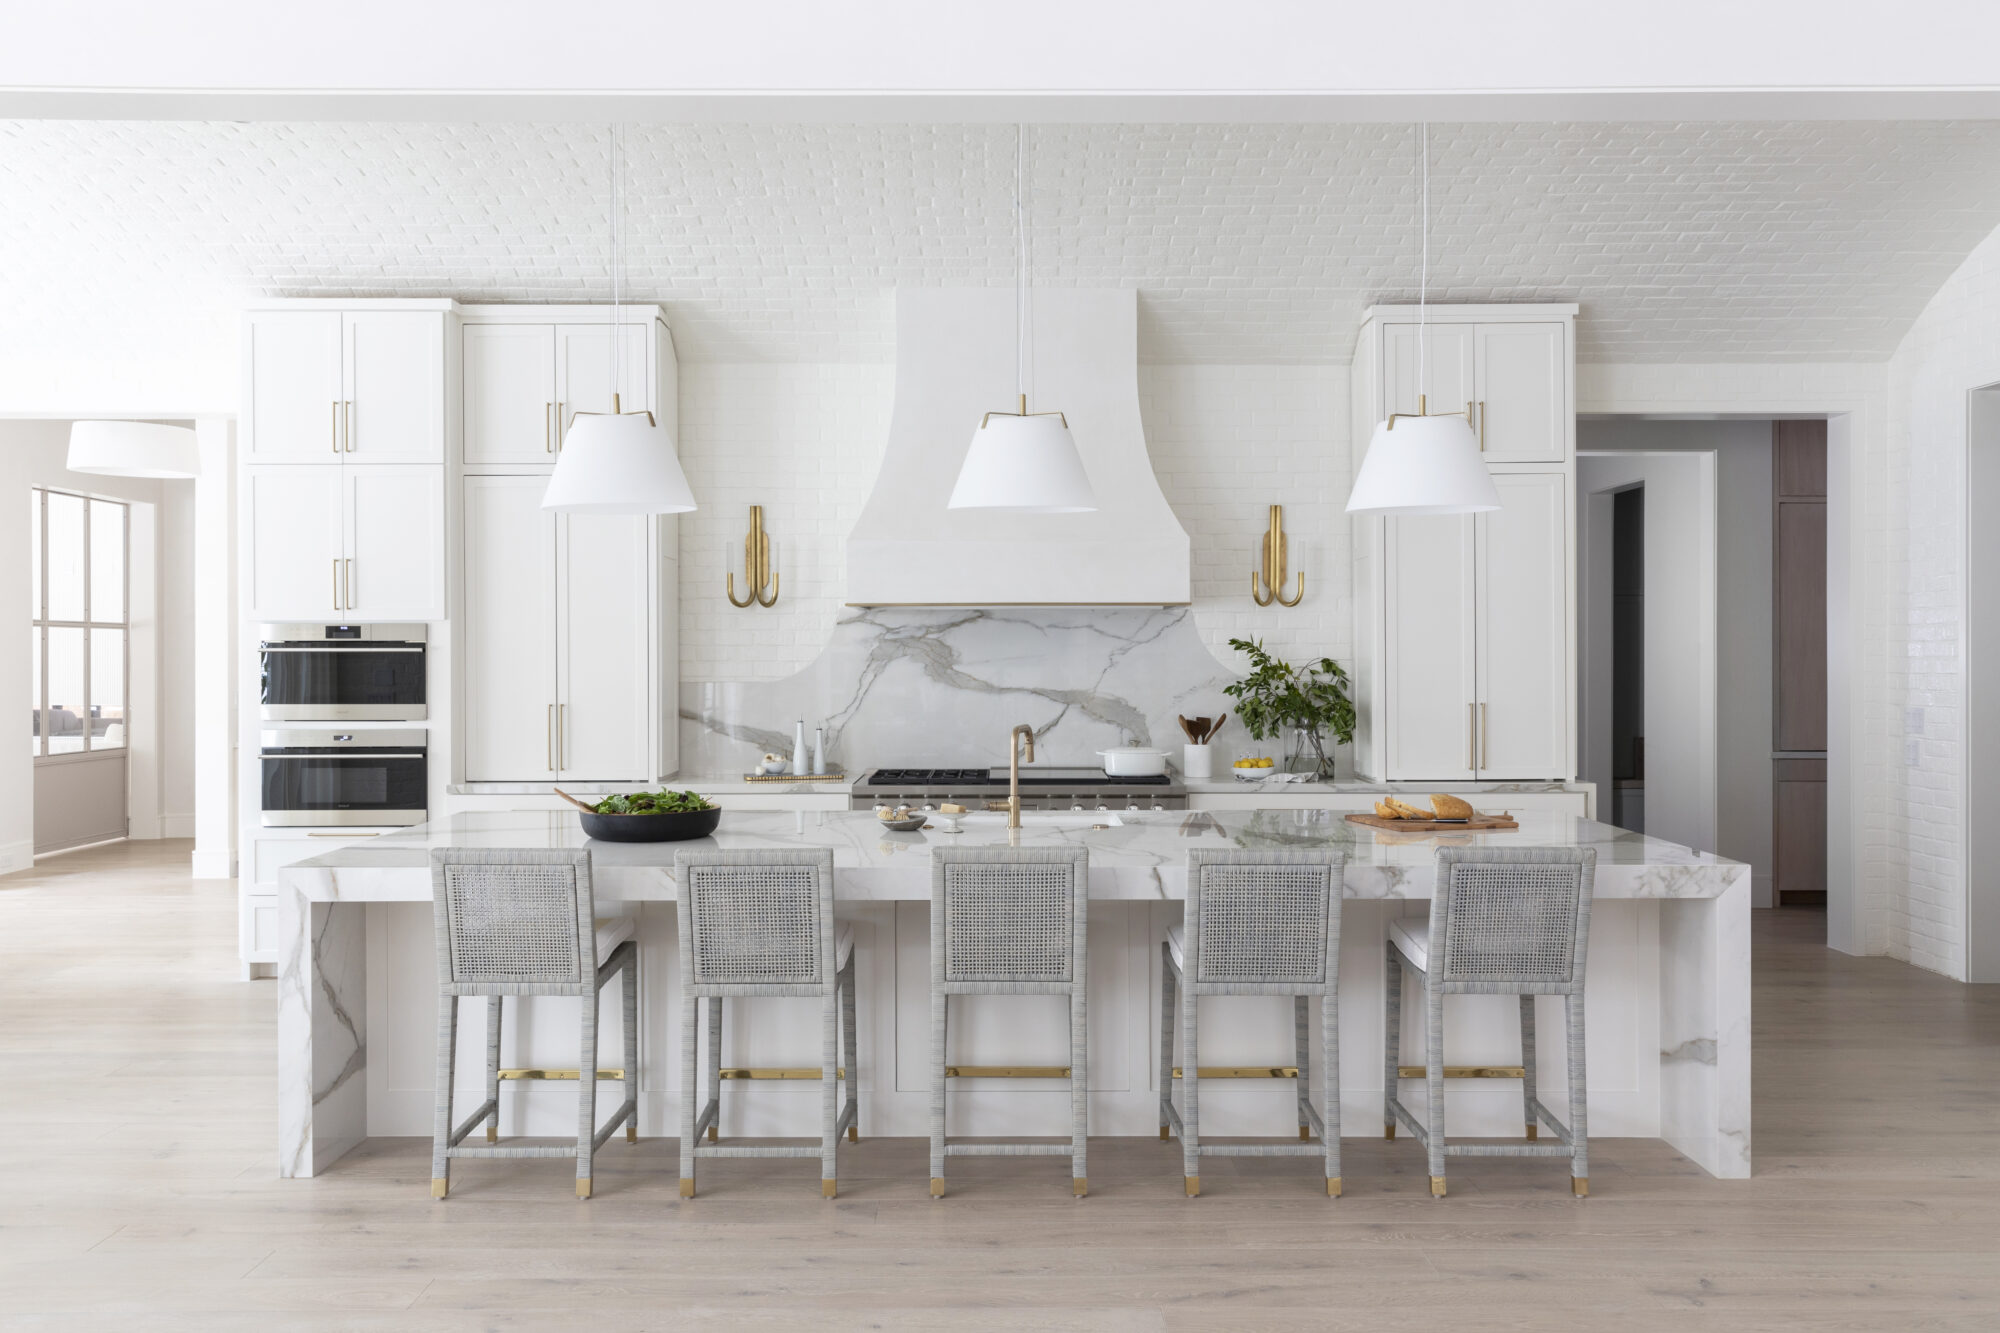 all-white kitchen design with matching counter stools, counter, cabinetry, and stove range and hood